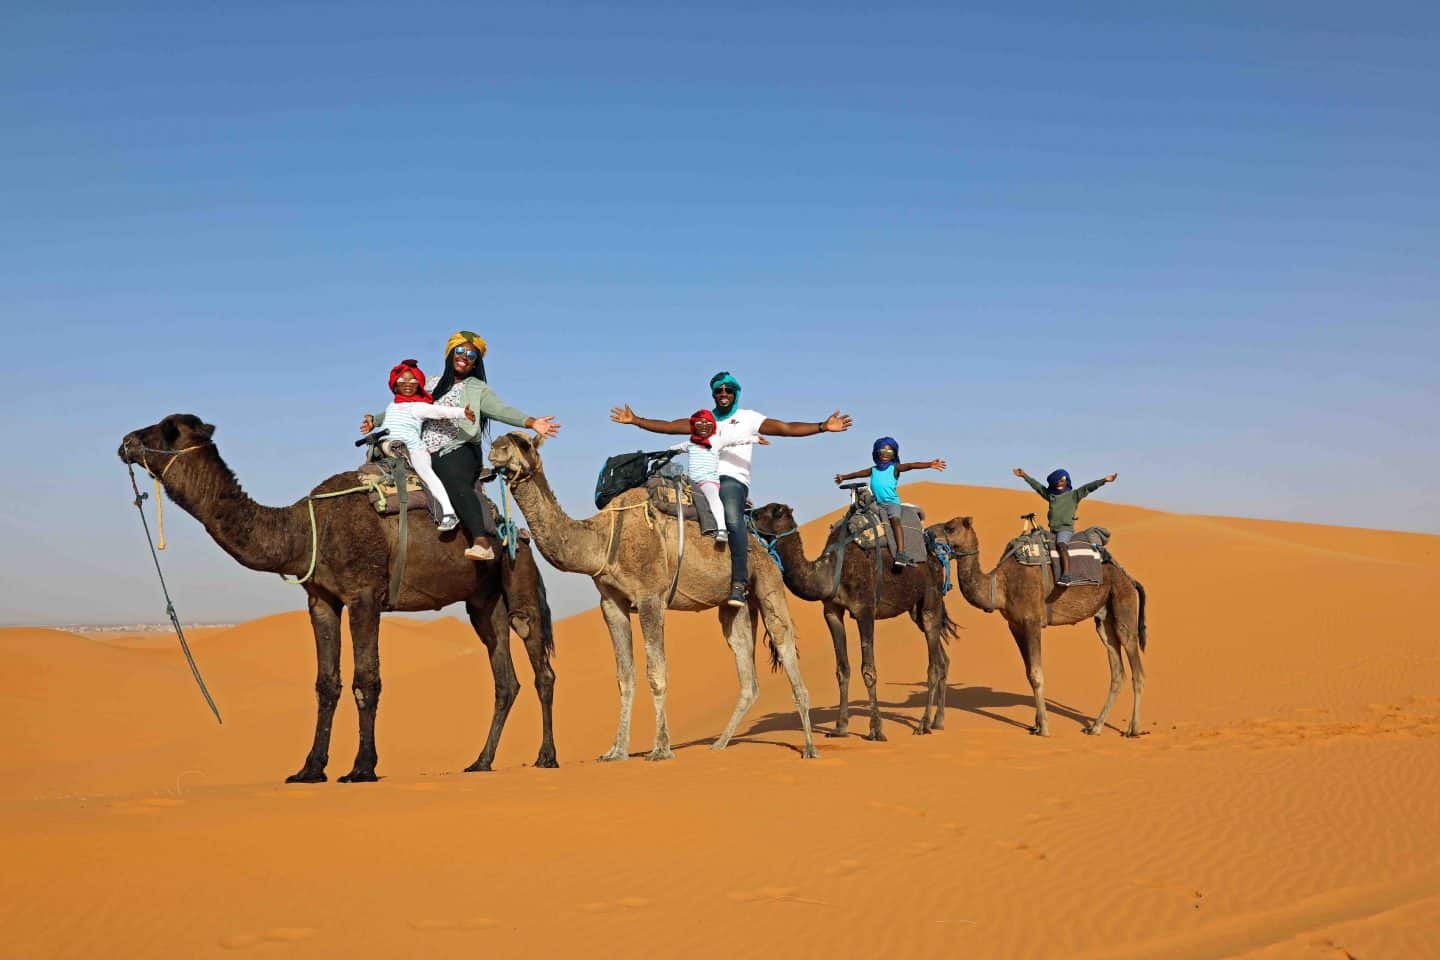 How To Plan A Vacation To Anywhere In The World | sahara desert with kids